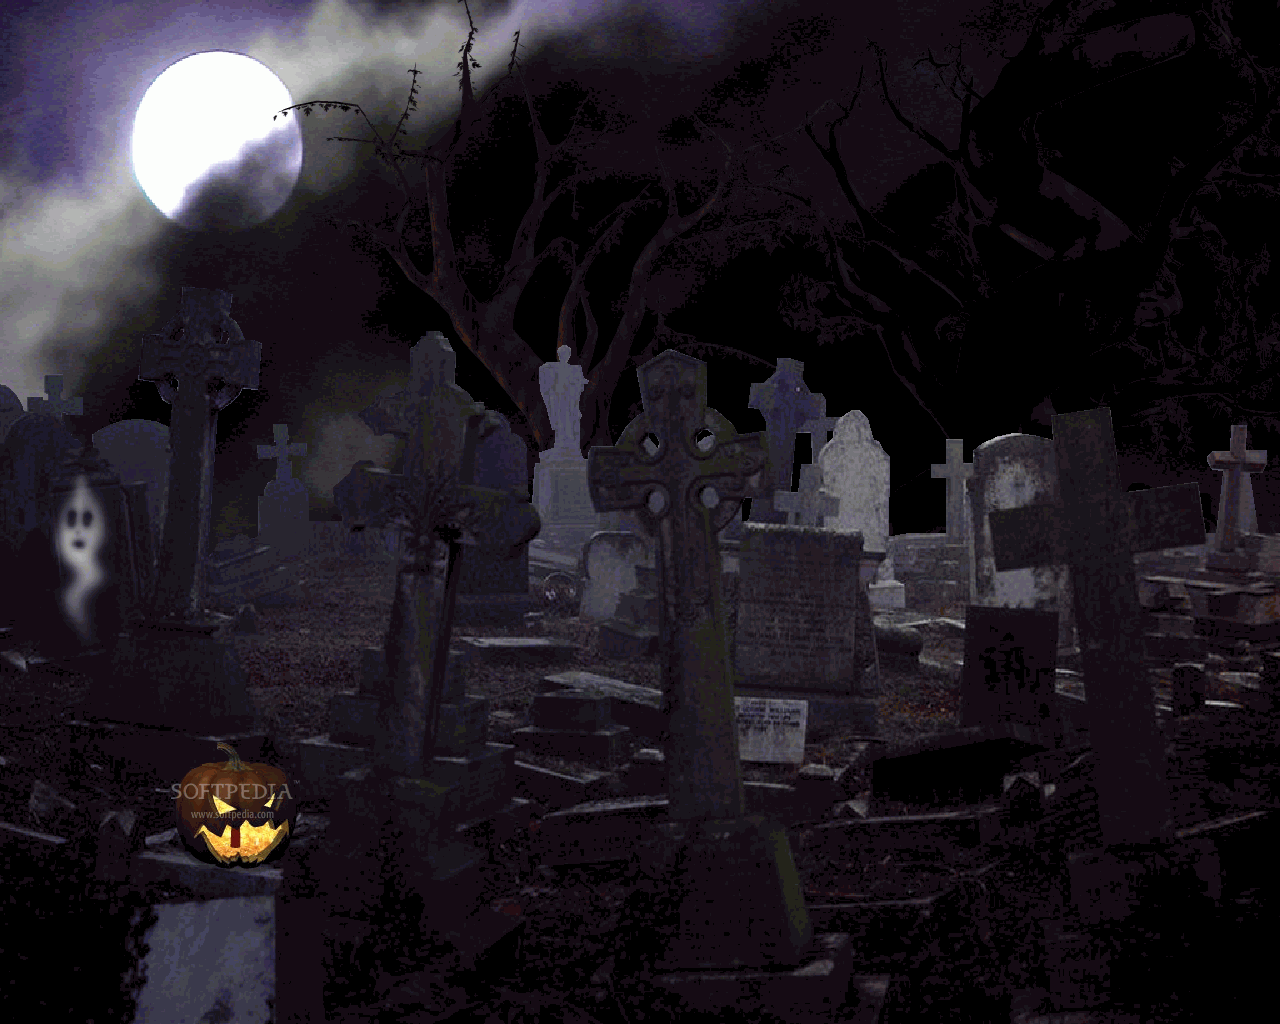 Halloween Animated Screensaver This Is The Image Displayed By